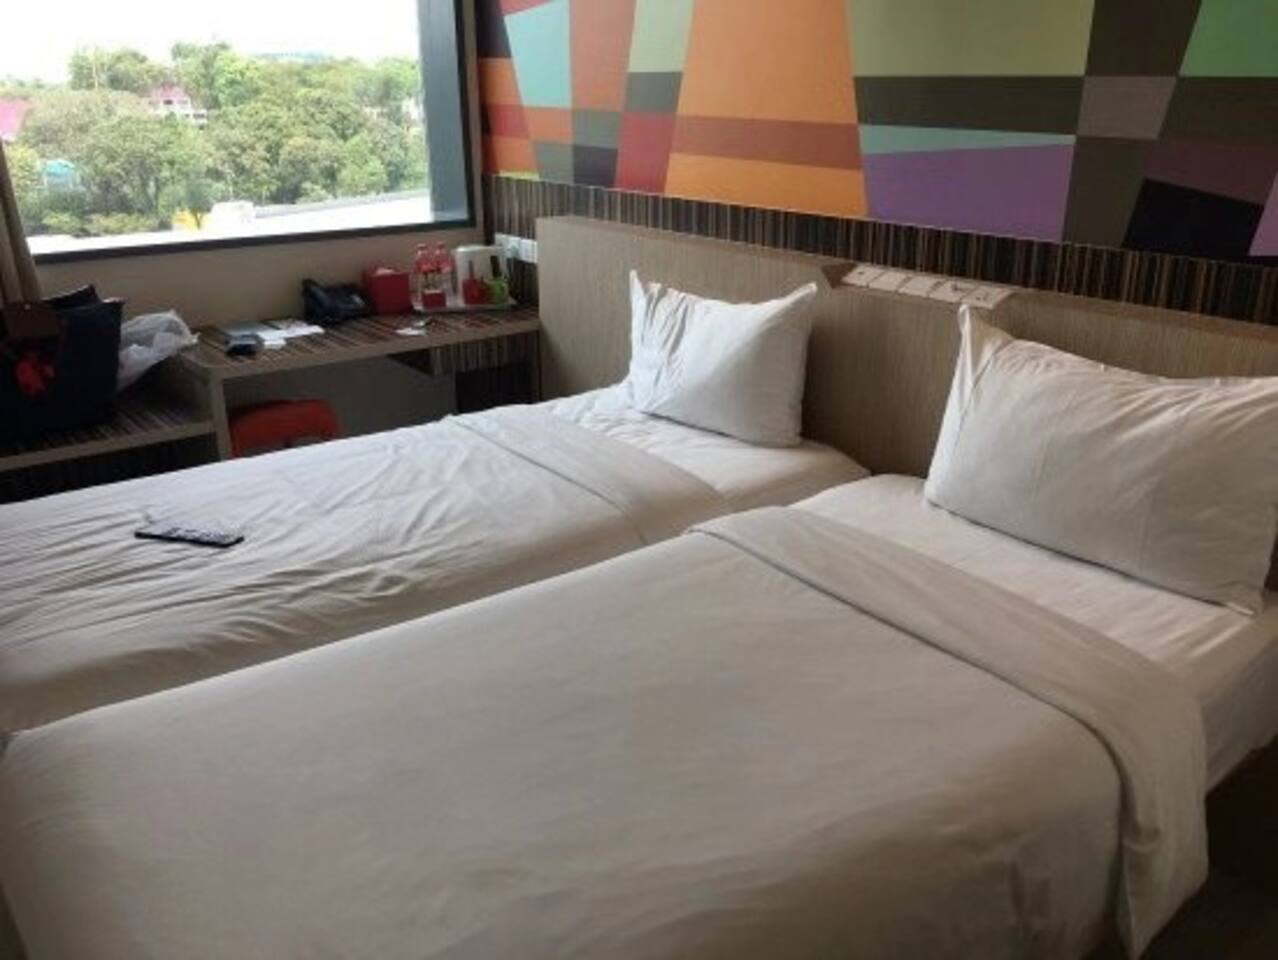 Superior Room At Genting Hotel Jurong Singapore Hotels For Rent In Singapore